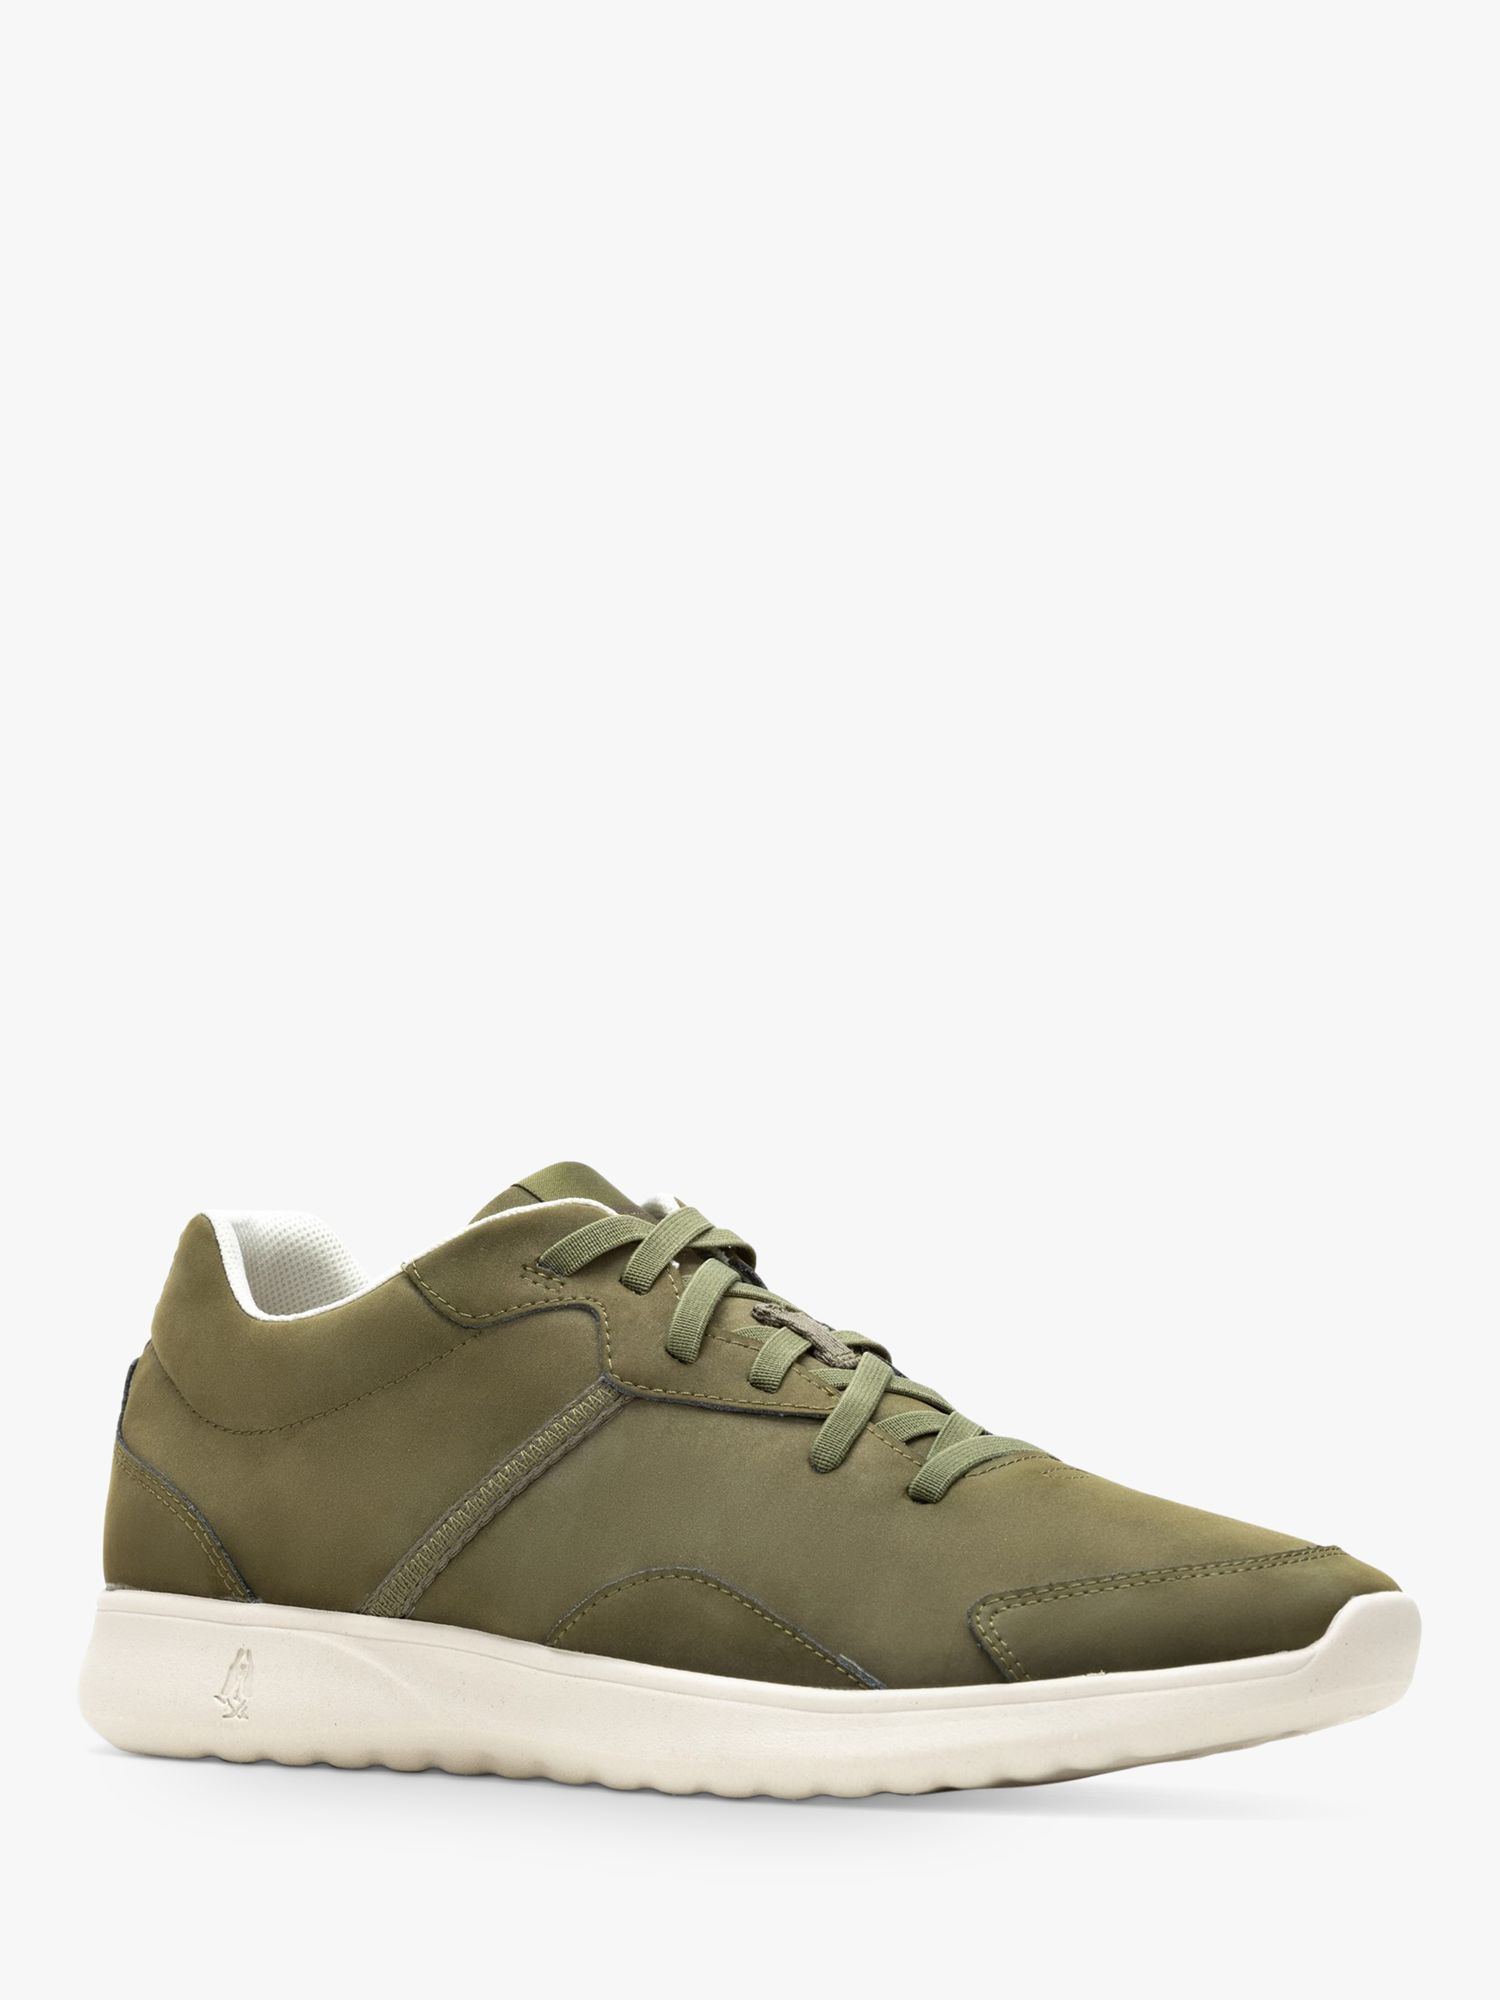 Hush Puppies The Good Trainers, Olive at John Lewis & Partners